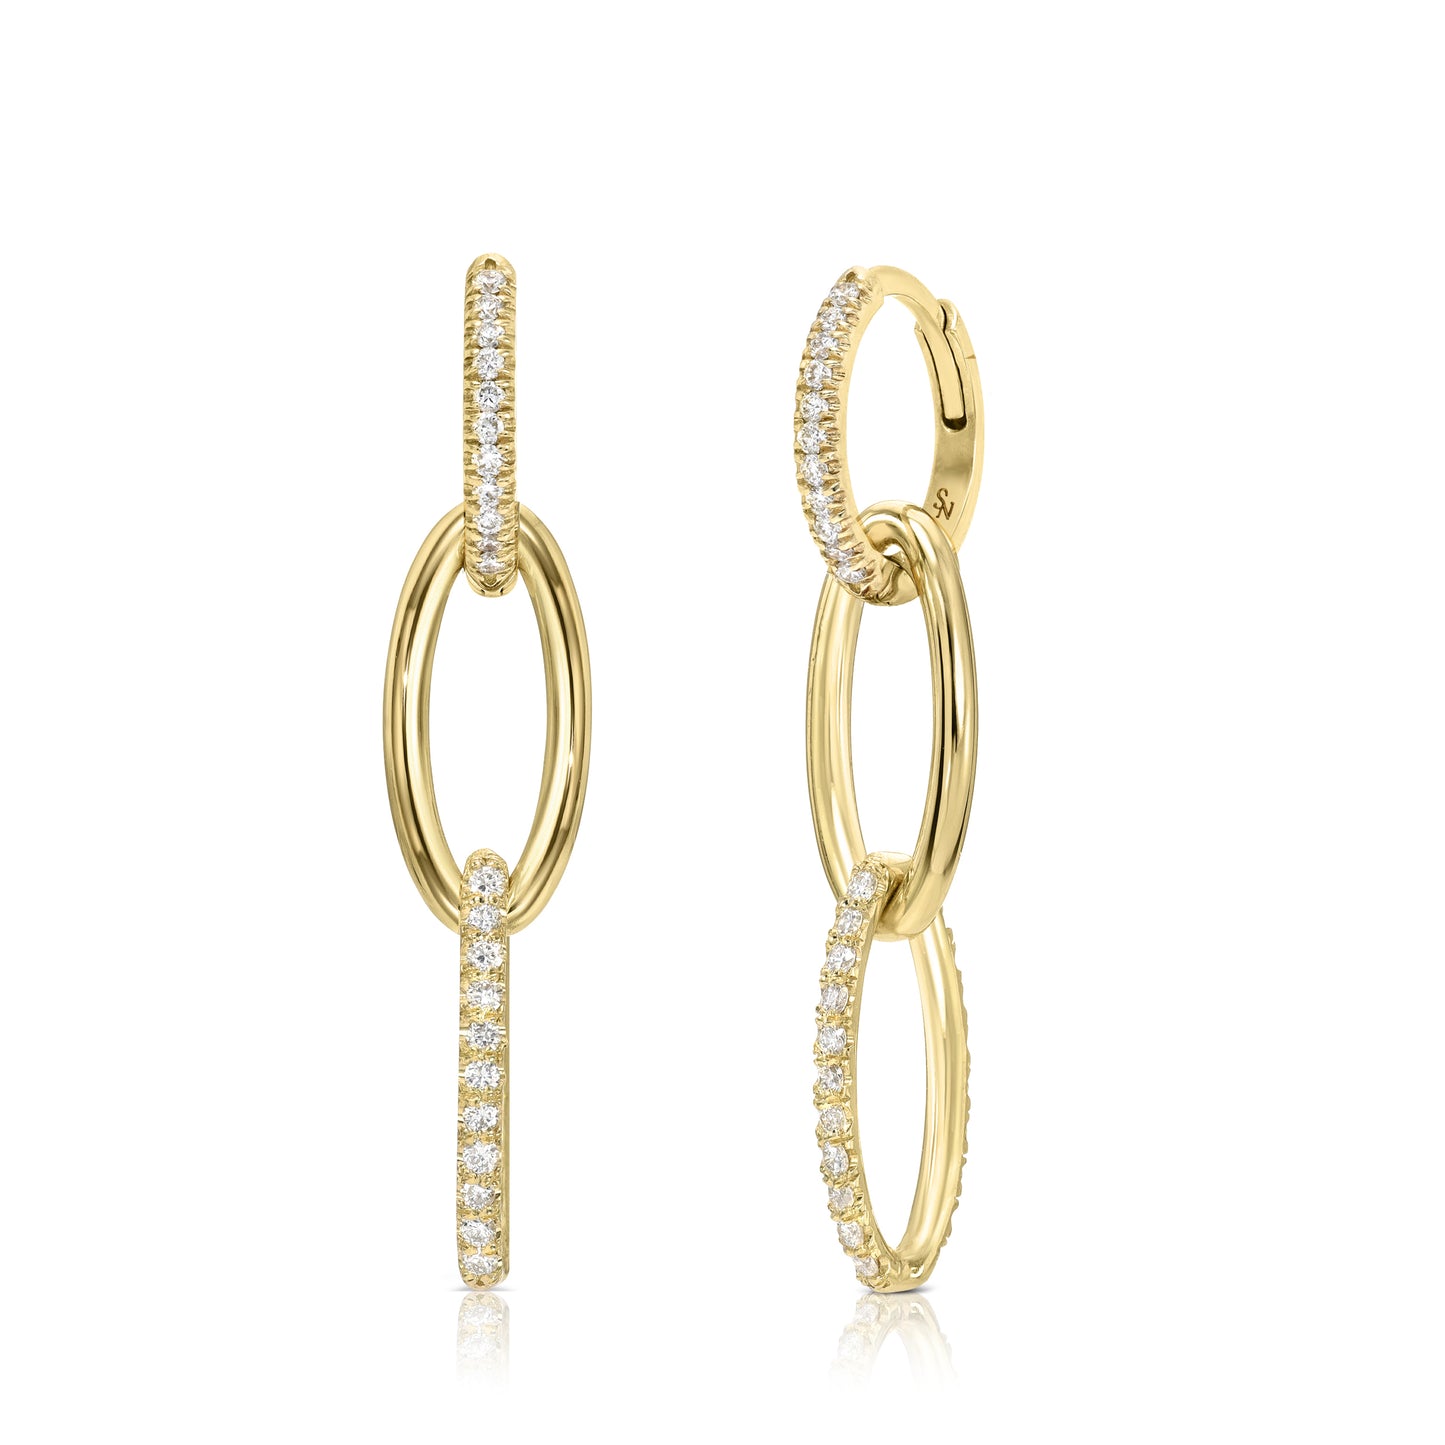 Oval Chain Link Hoops with Diamonds